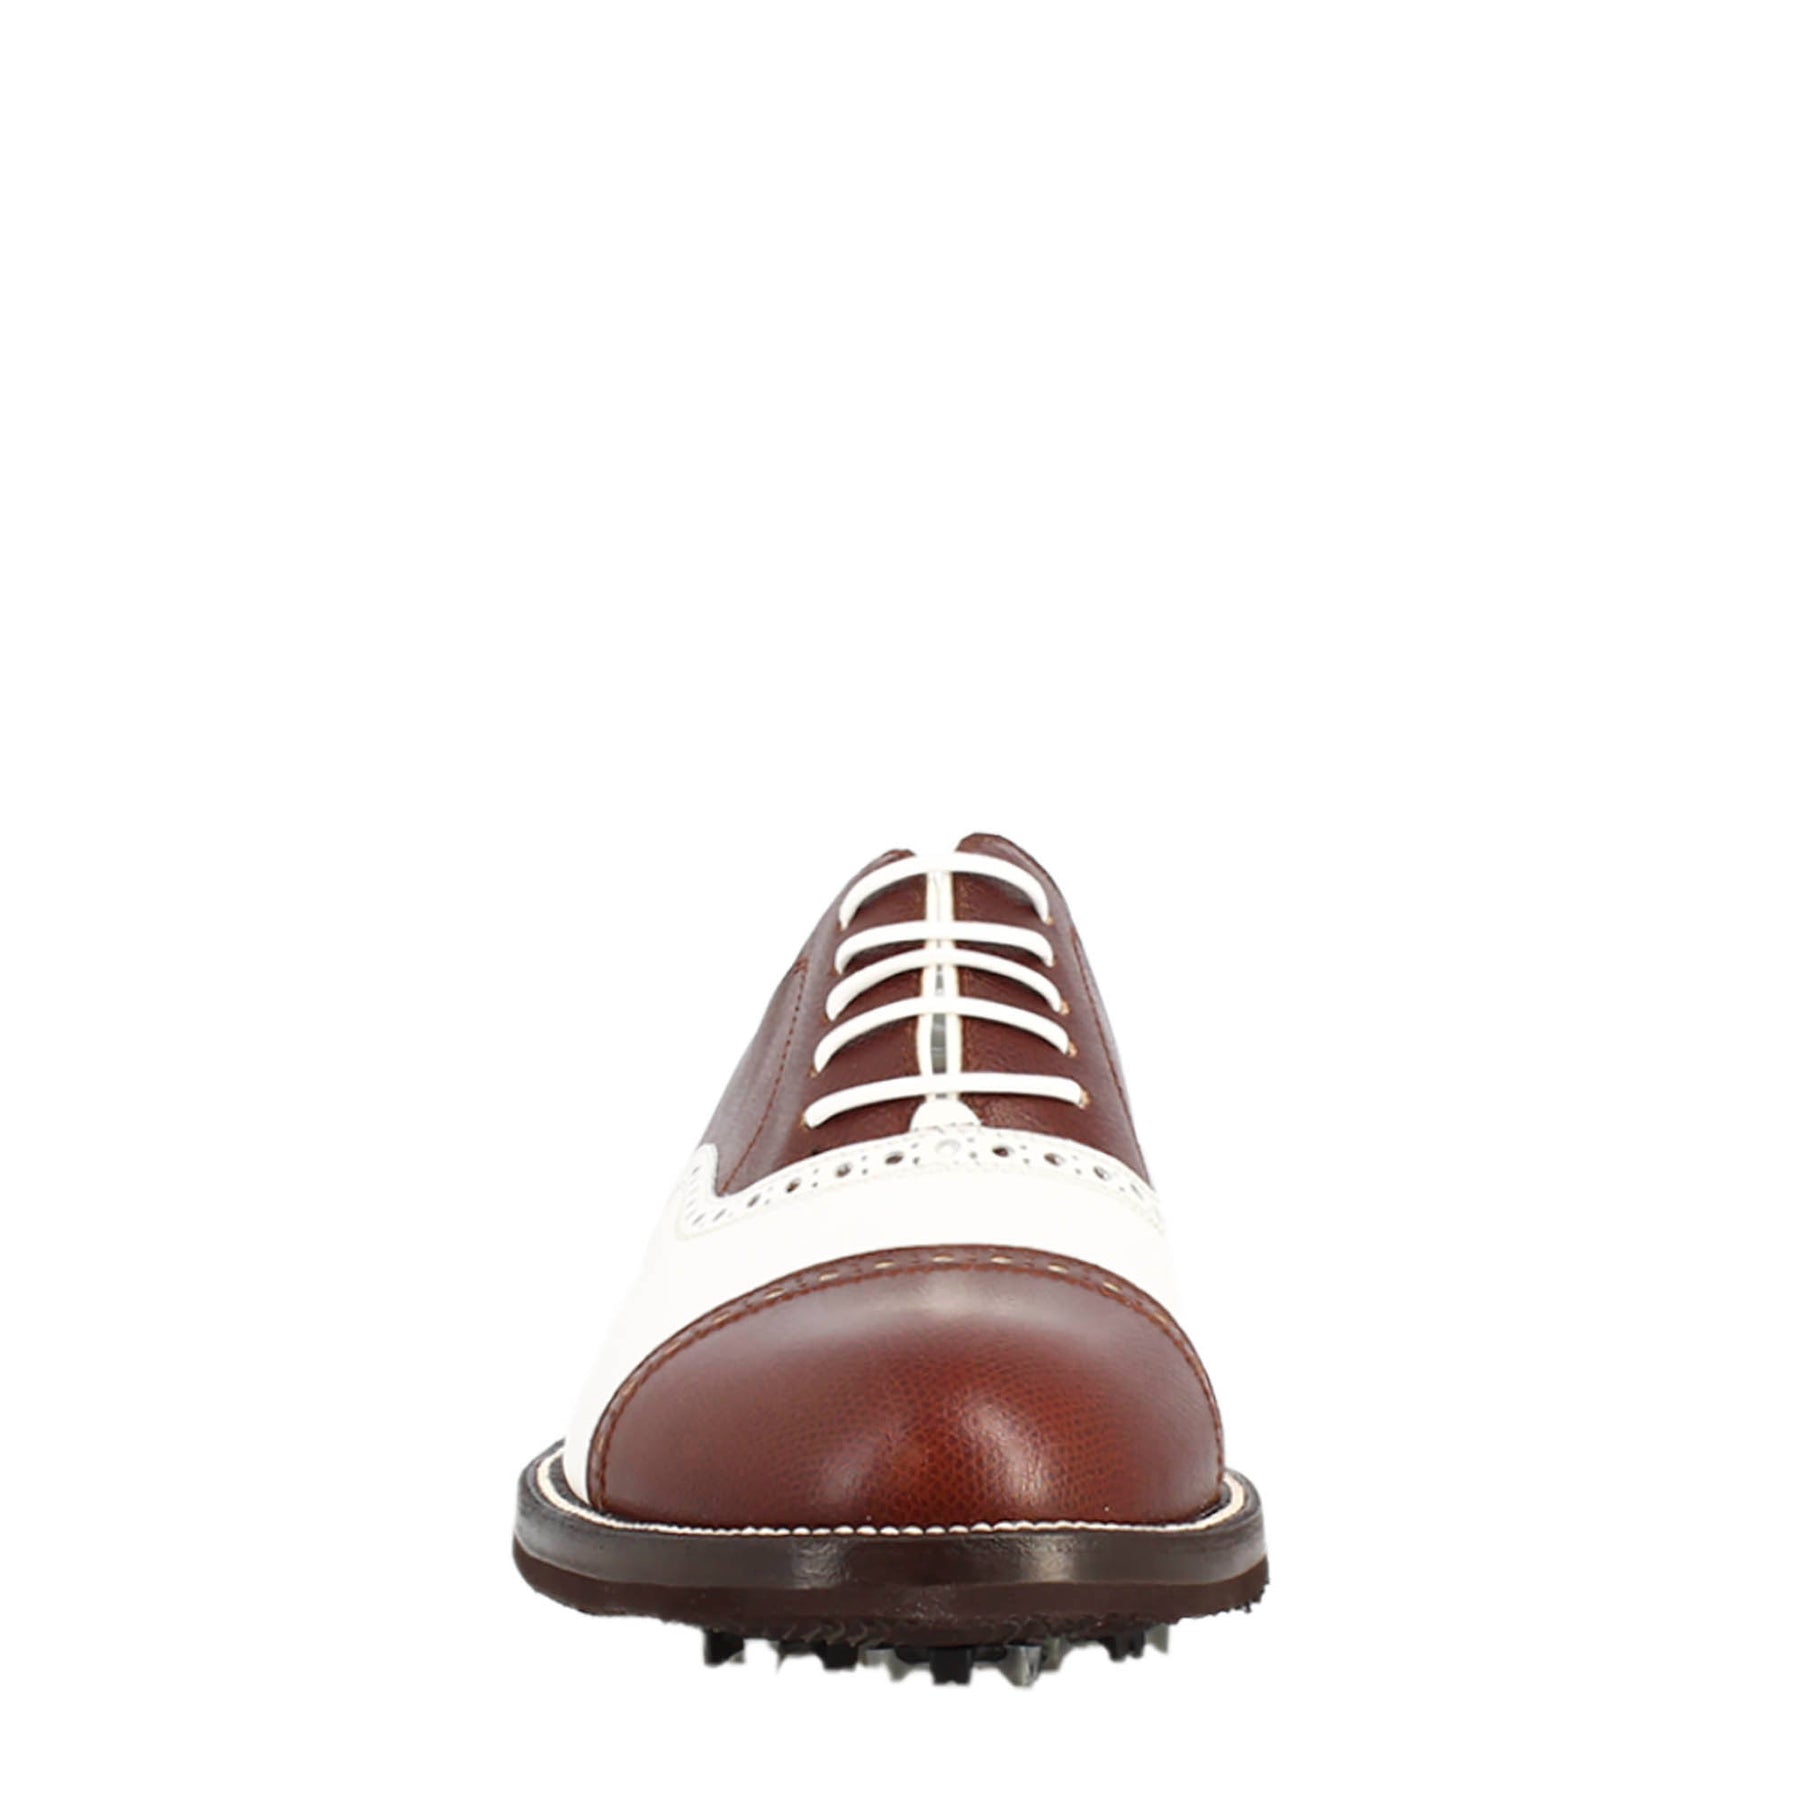 Handcrafted white and brown leather LRP men's golf shoes with brogue details